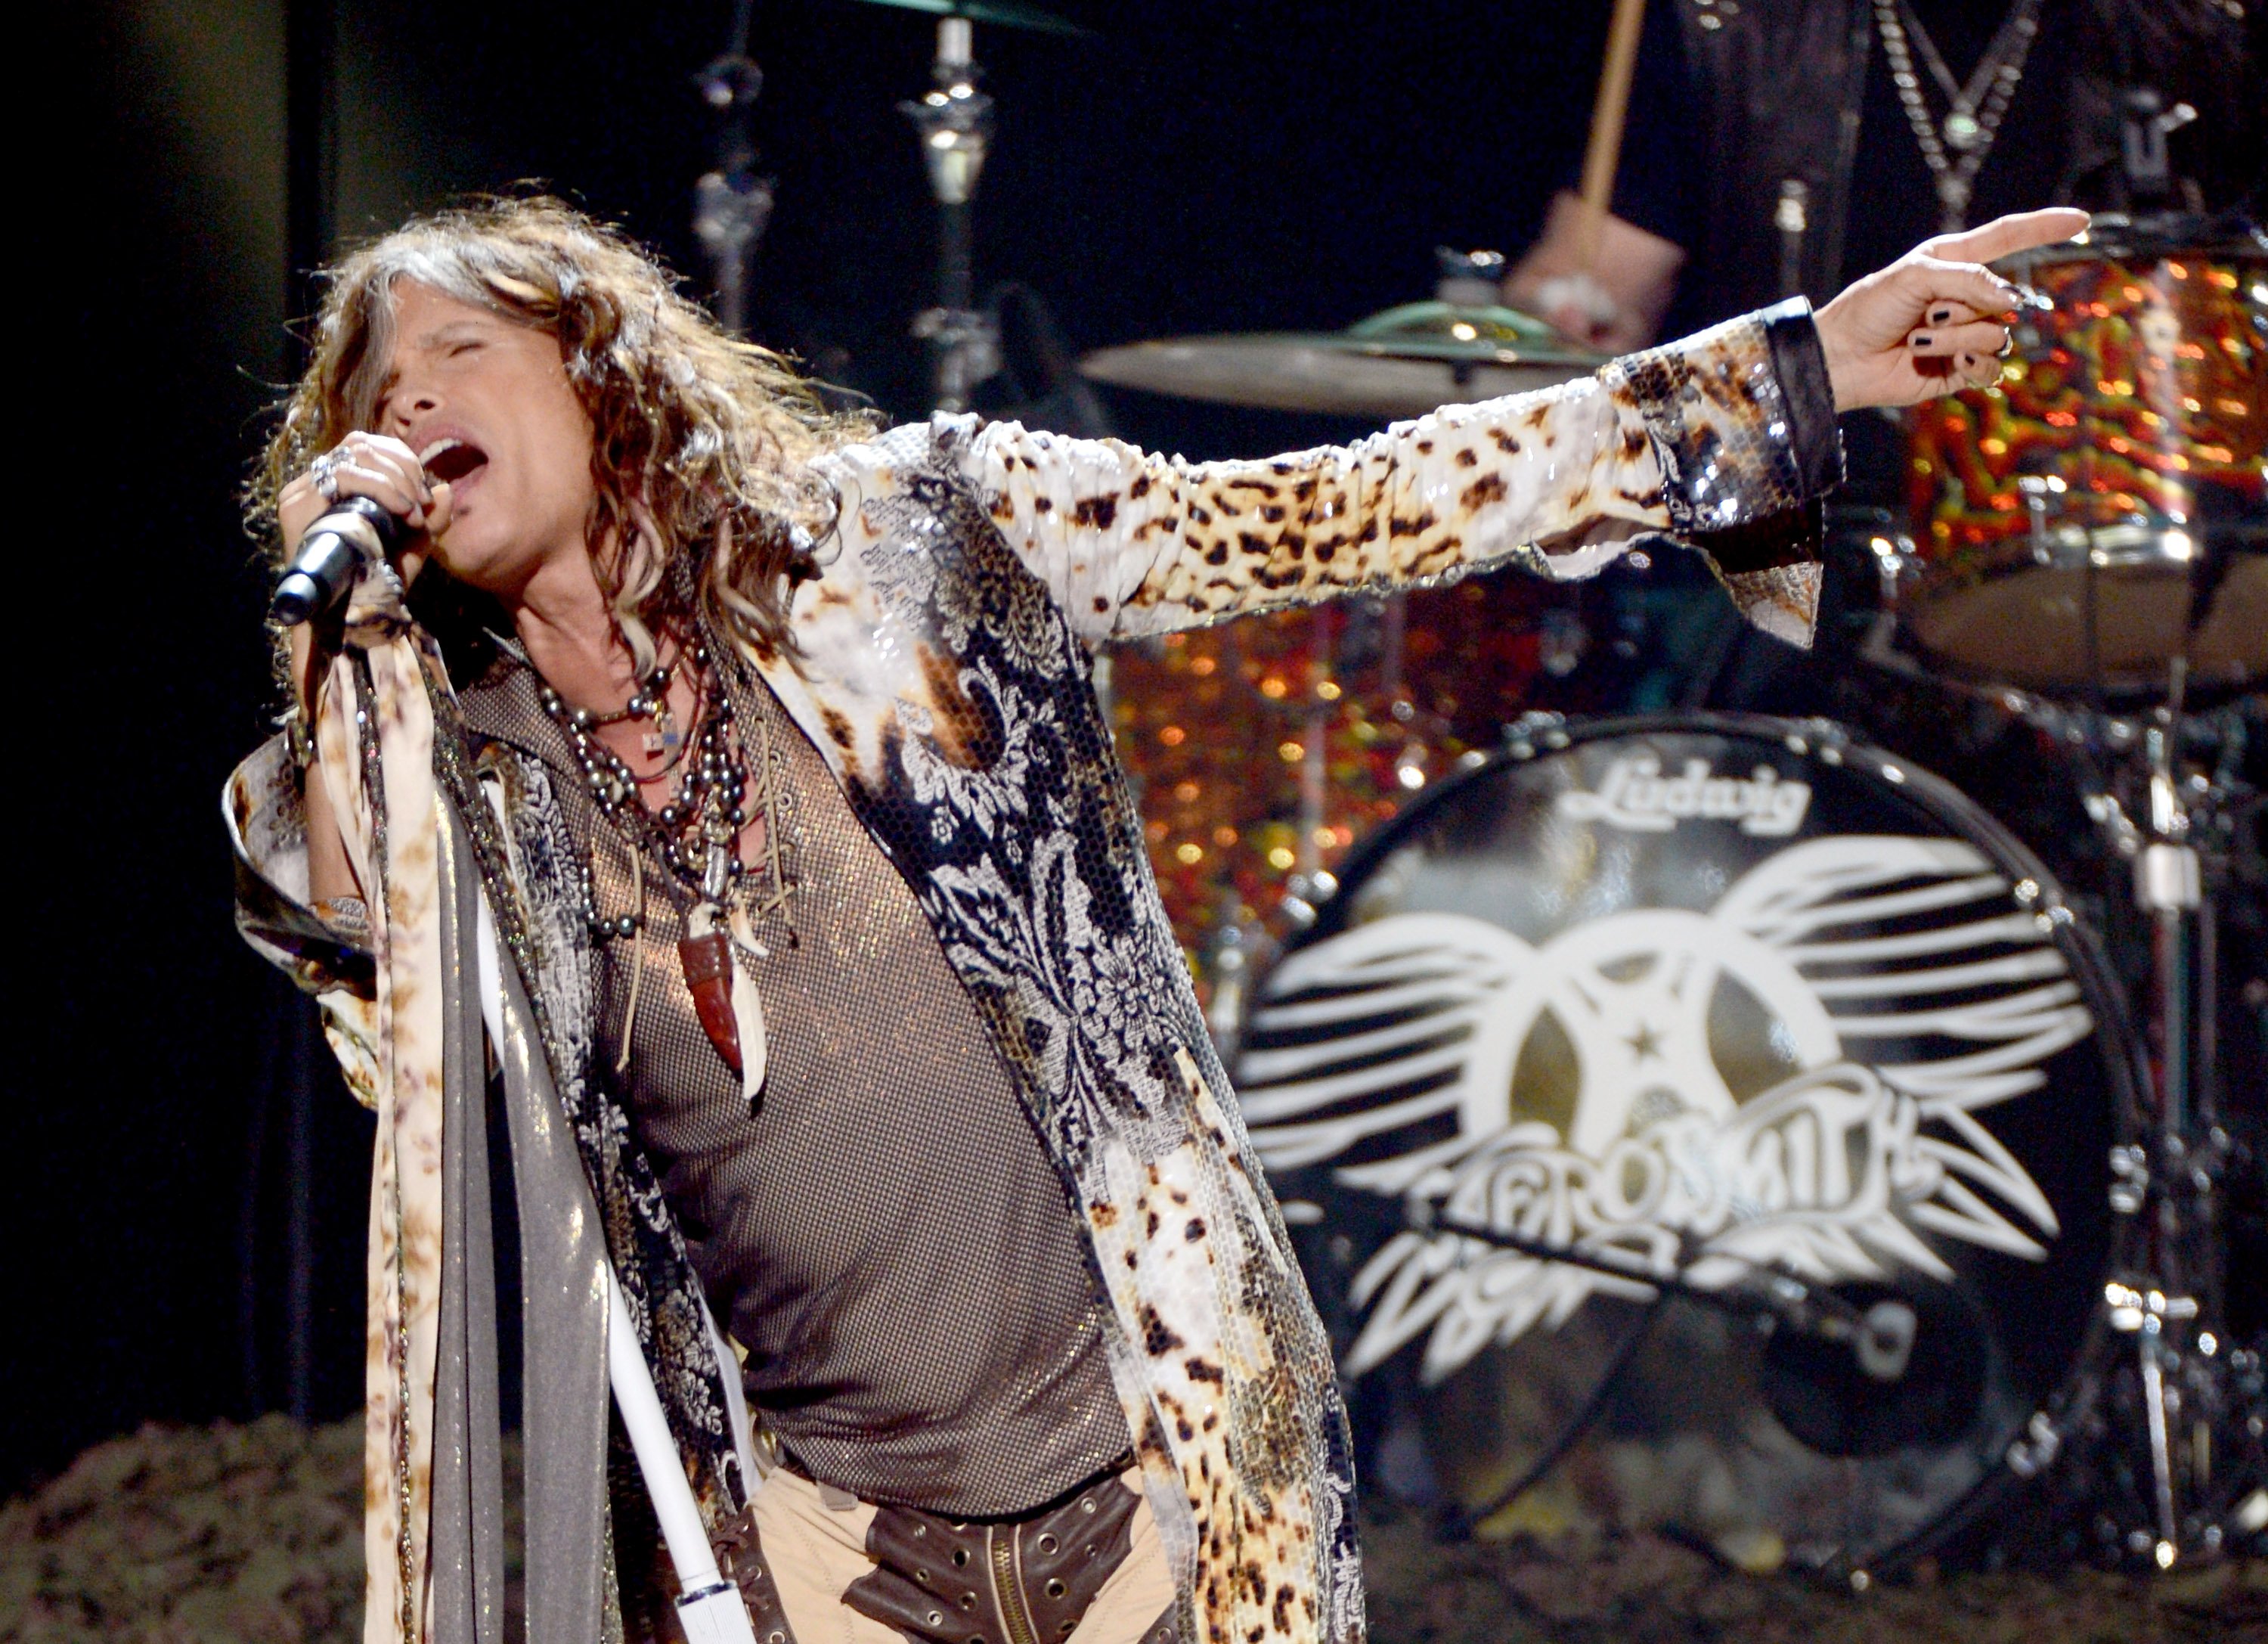 Steven Tyler singing while wearing a leopard print top and pants. 